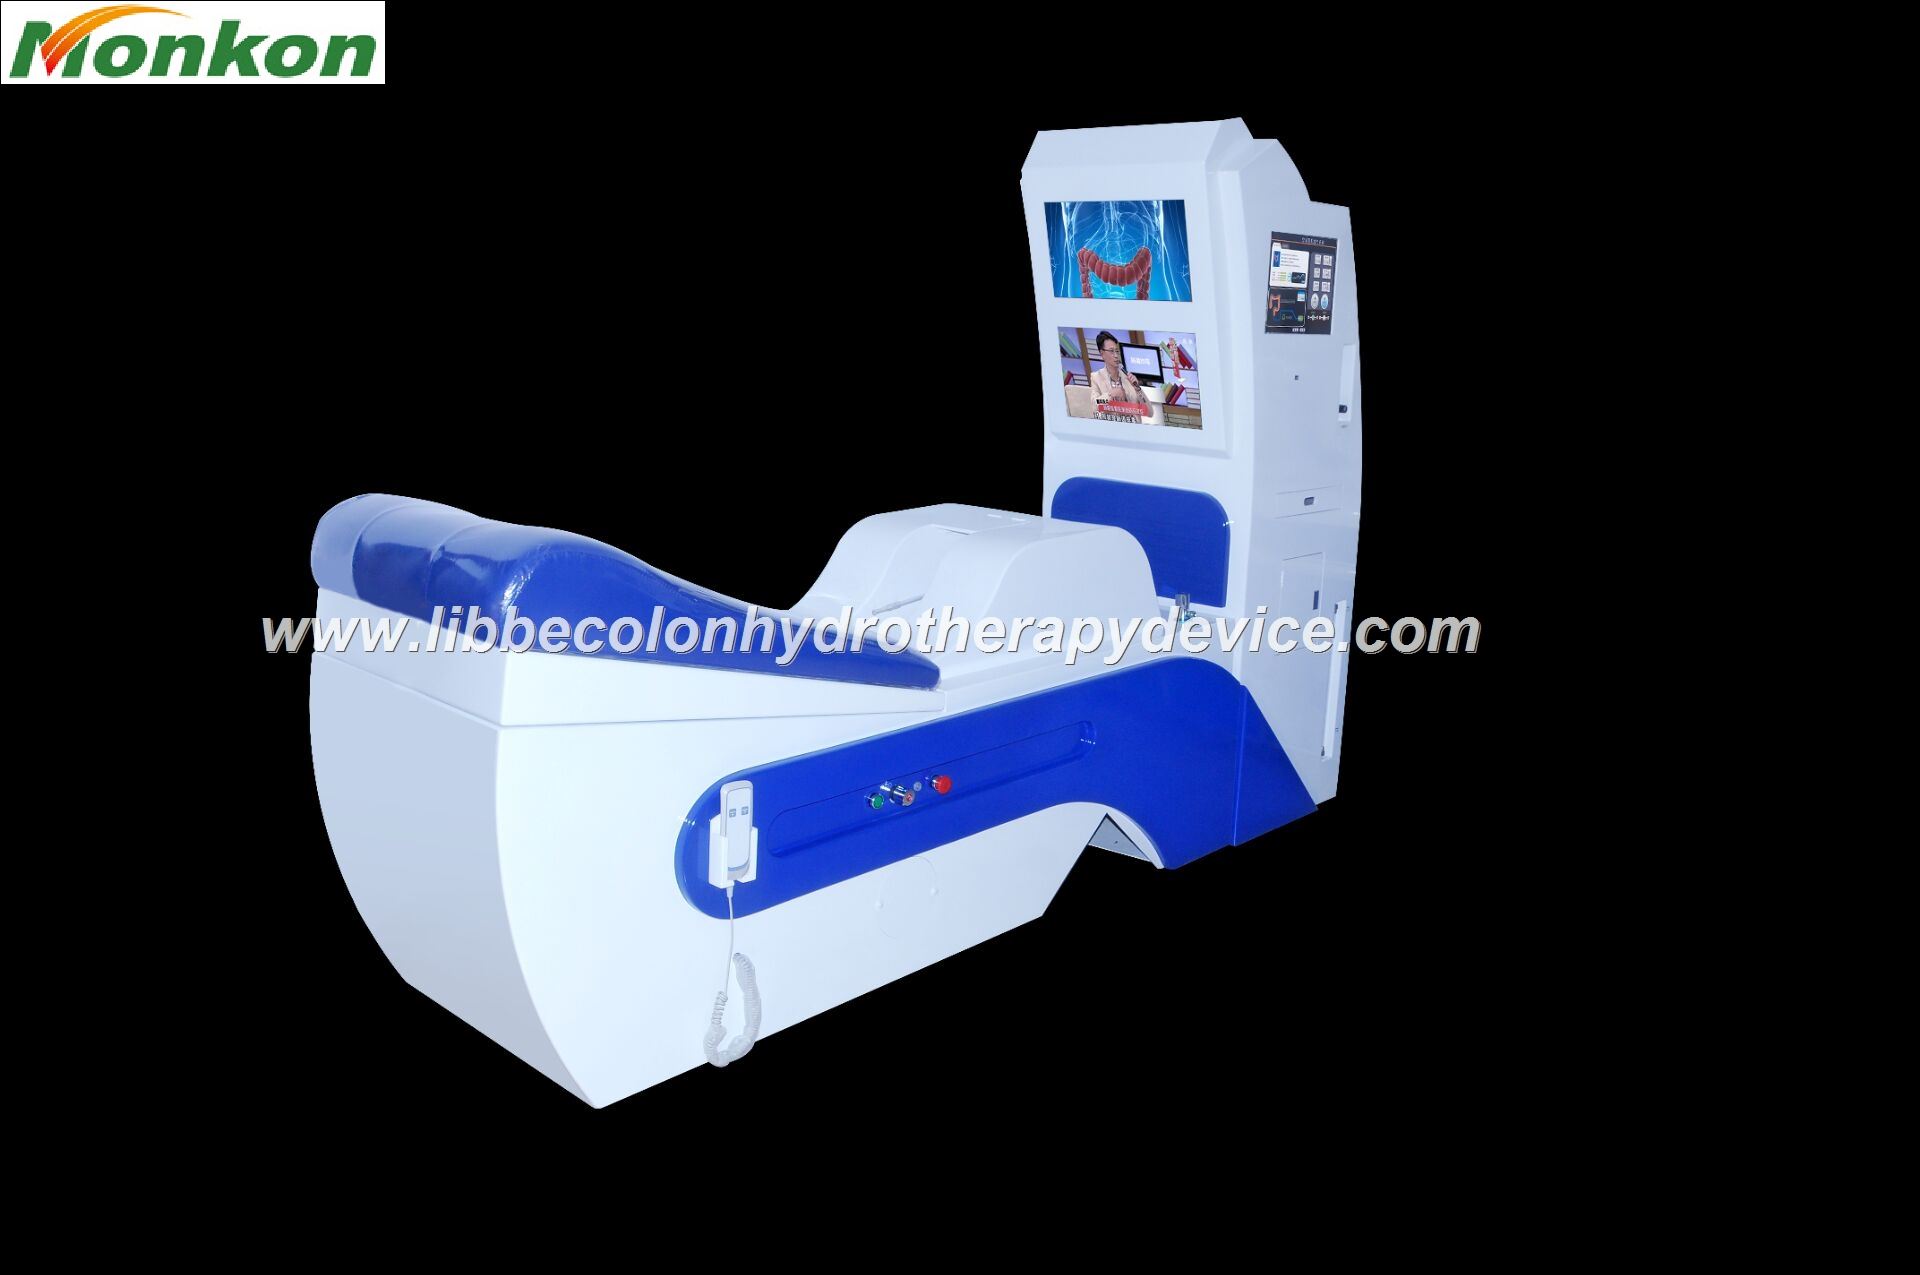 MAIKONG Colonic machine cost procedure that cleans out your colon best all natural colon cleanse